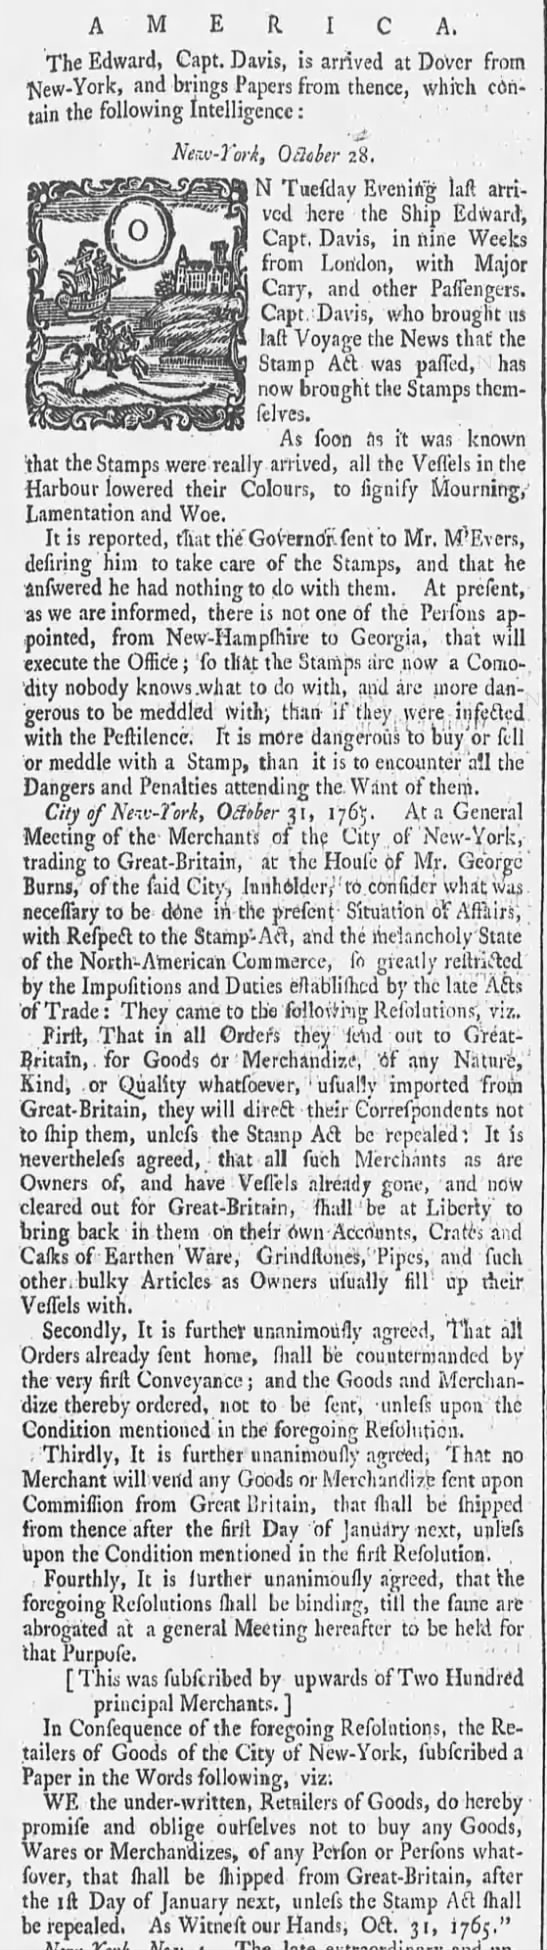 New York merchants react to the passing of the Stamp Act - 